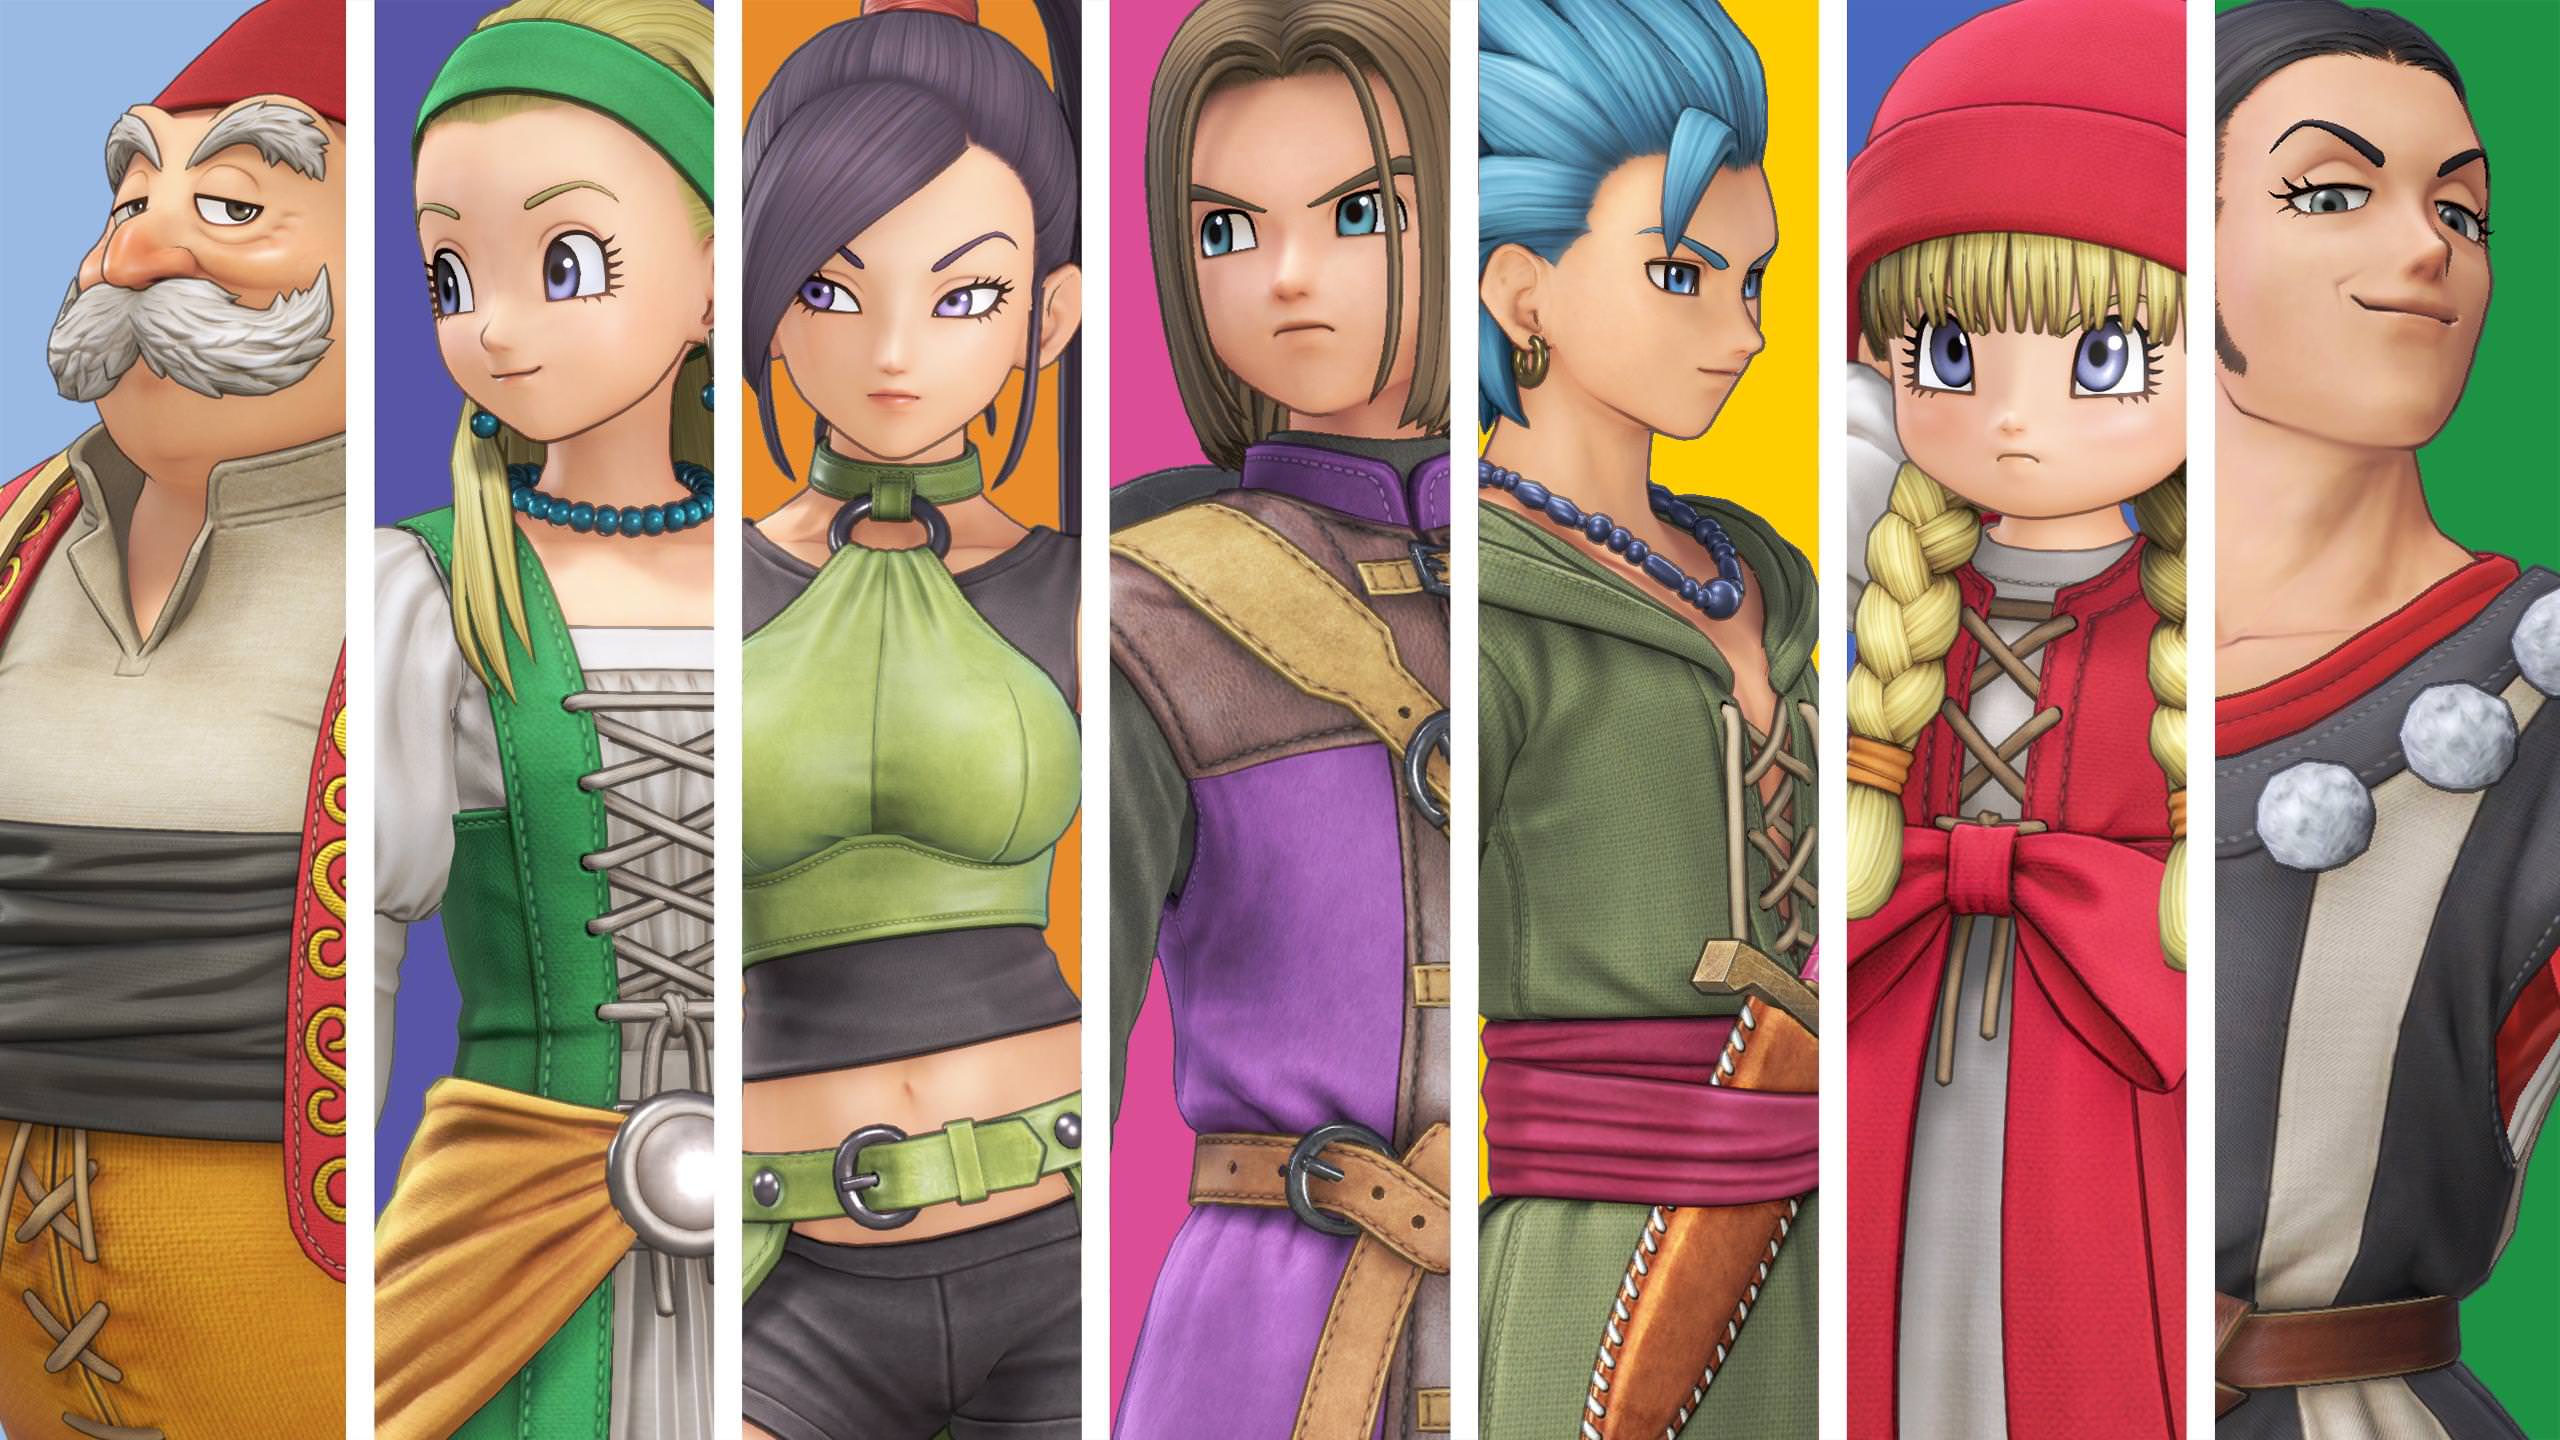 Dragon Quest XI S: Echoes of an Elusive Age - Definitive Edition -  Metacritic